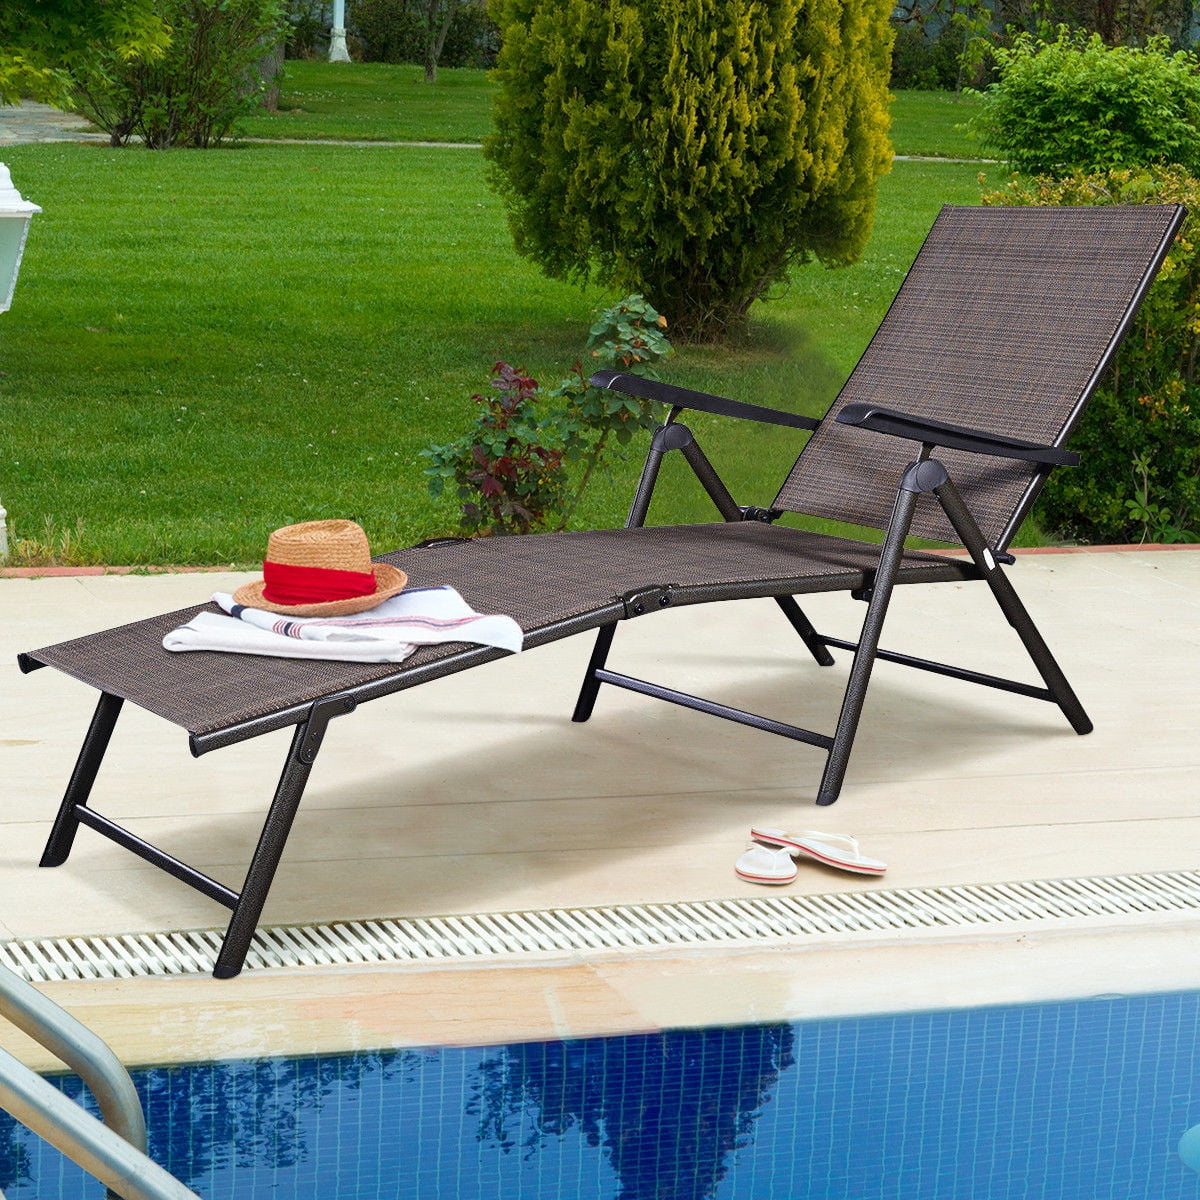 Costway Pool Chaise Lounge Chair Recliner Outdoor Patio ...